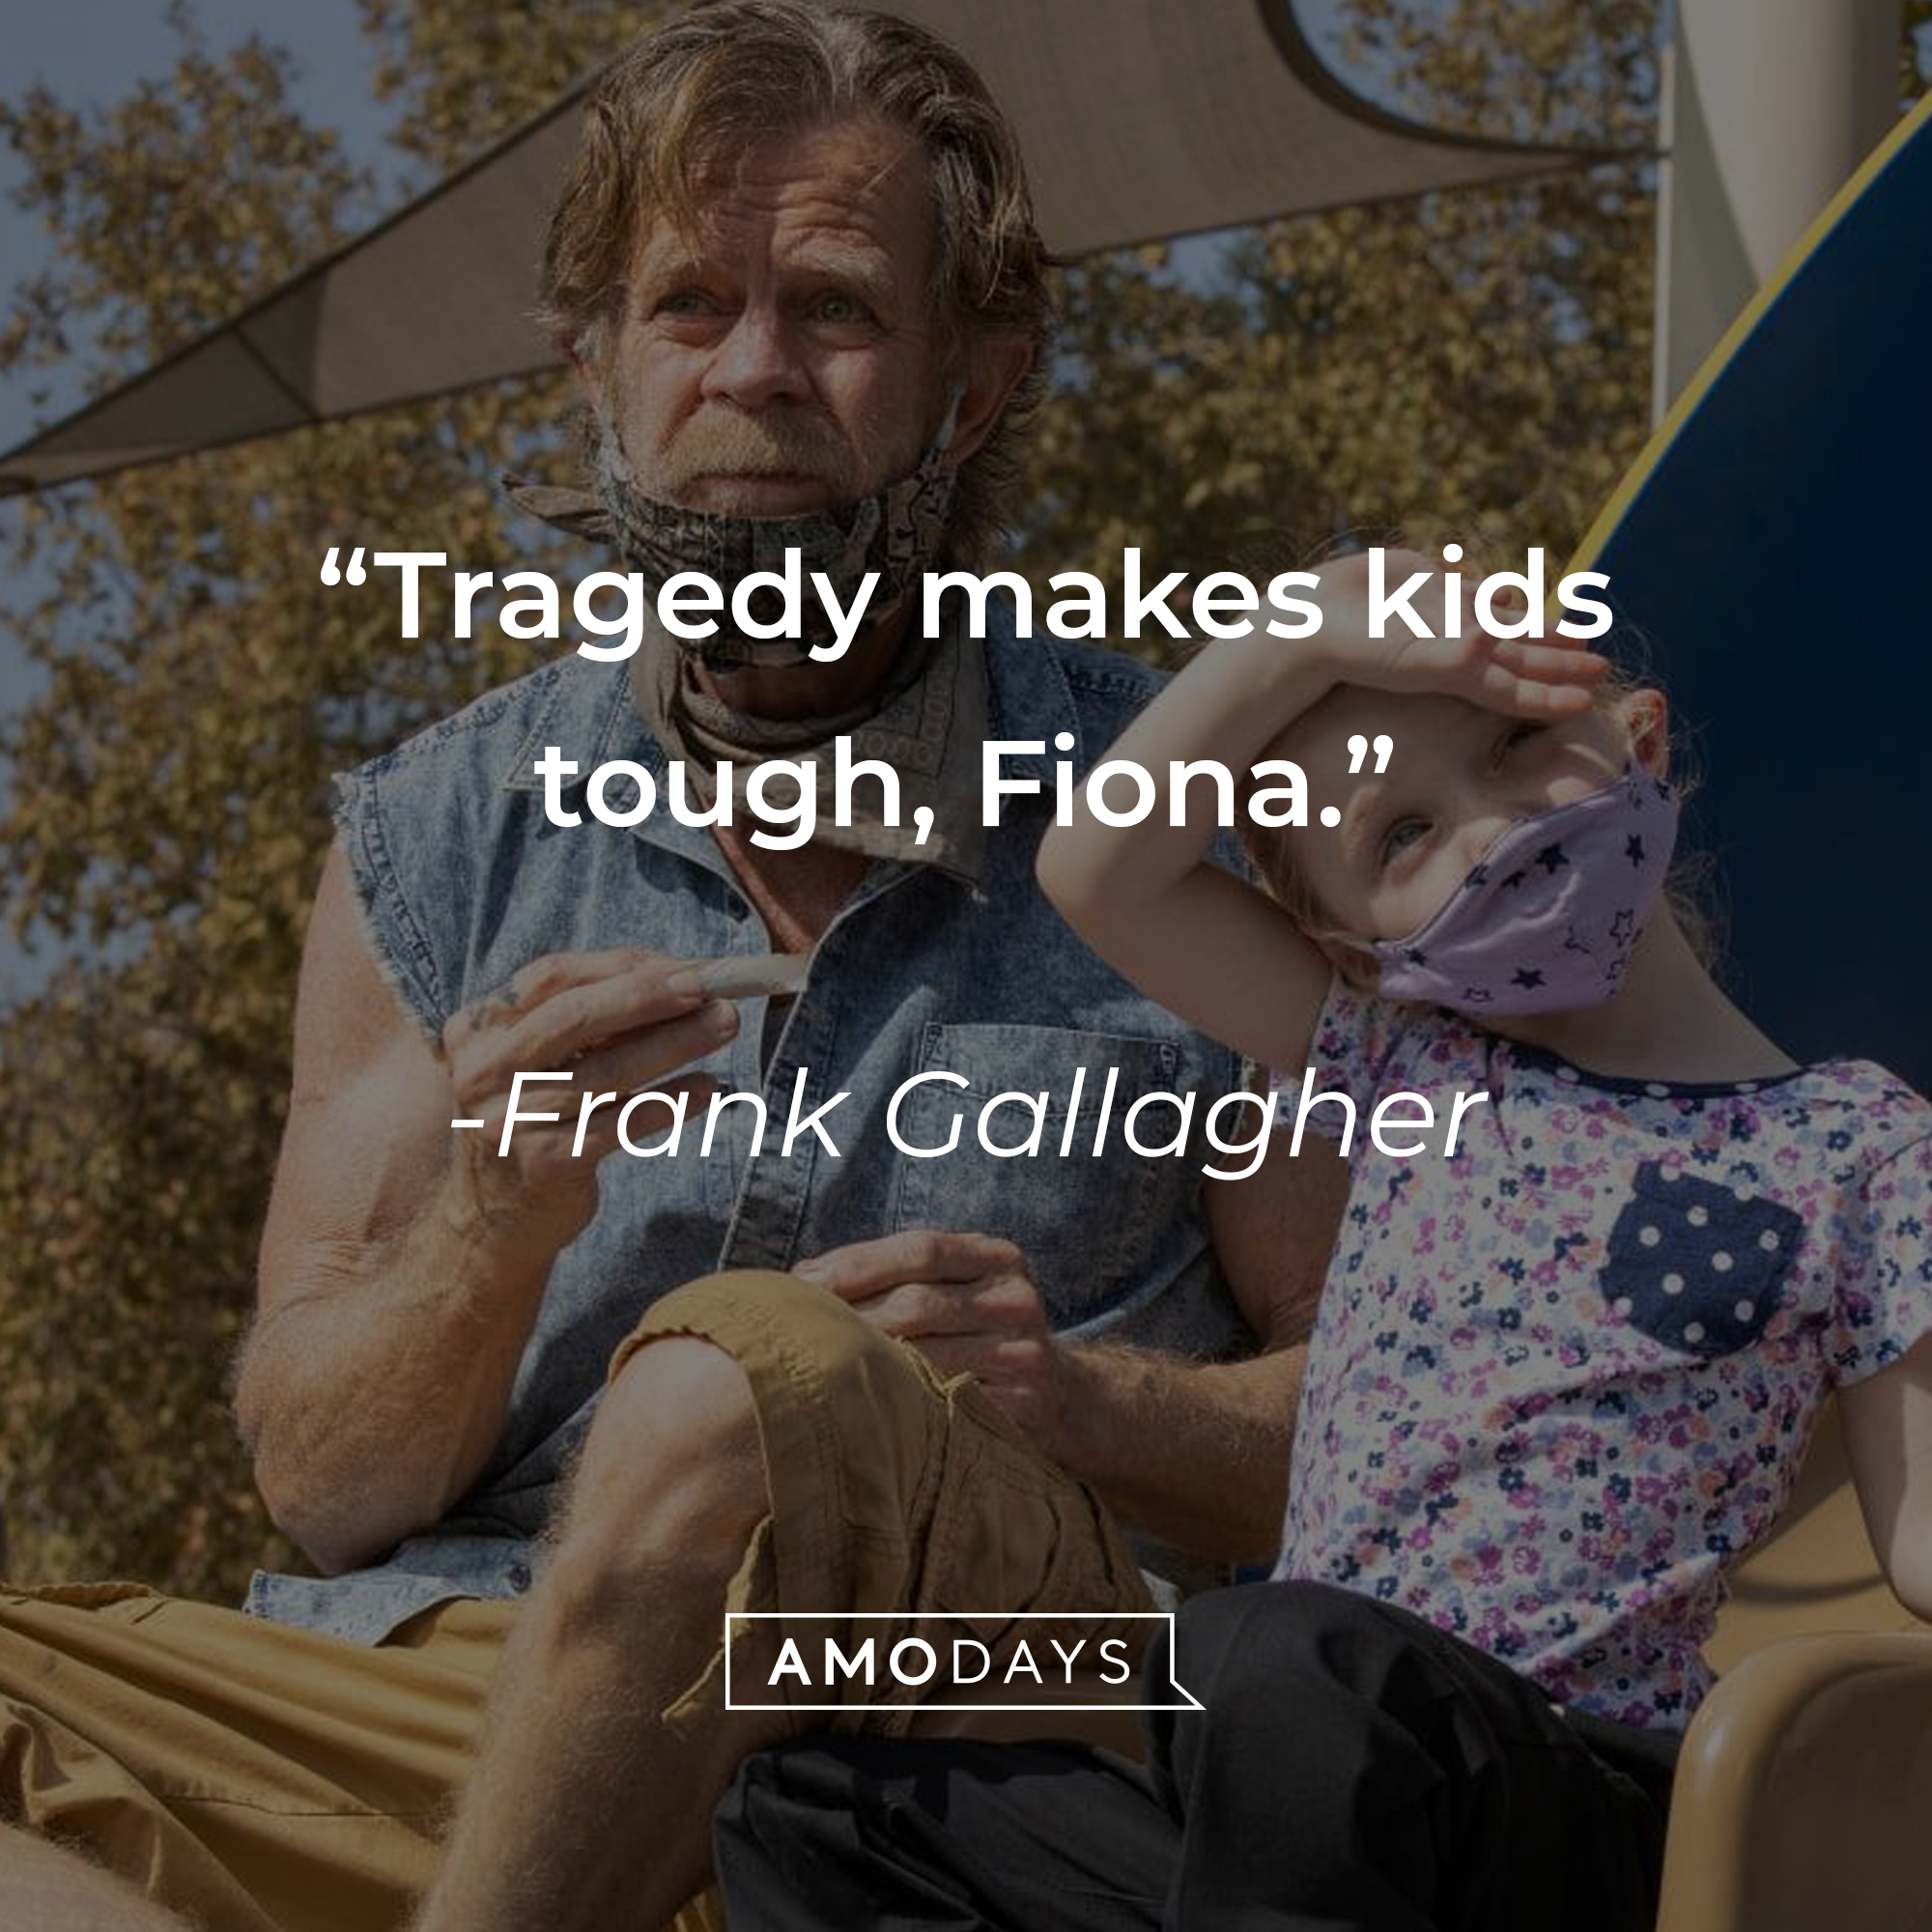 Frank Gallagher's quote: "Tragedy makes kids tough, Fiona." | Source: facebook.com/ShamelessOnShowtime